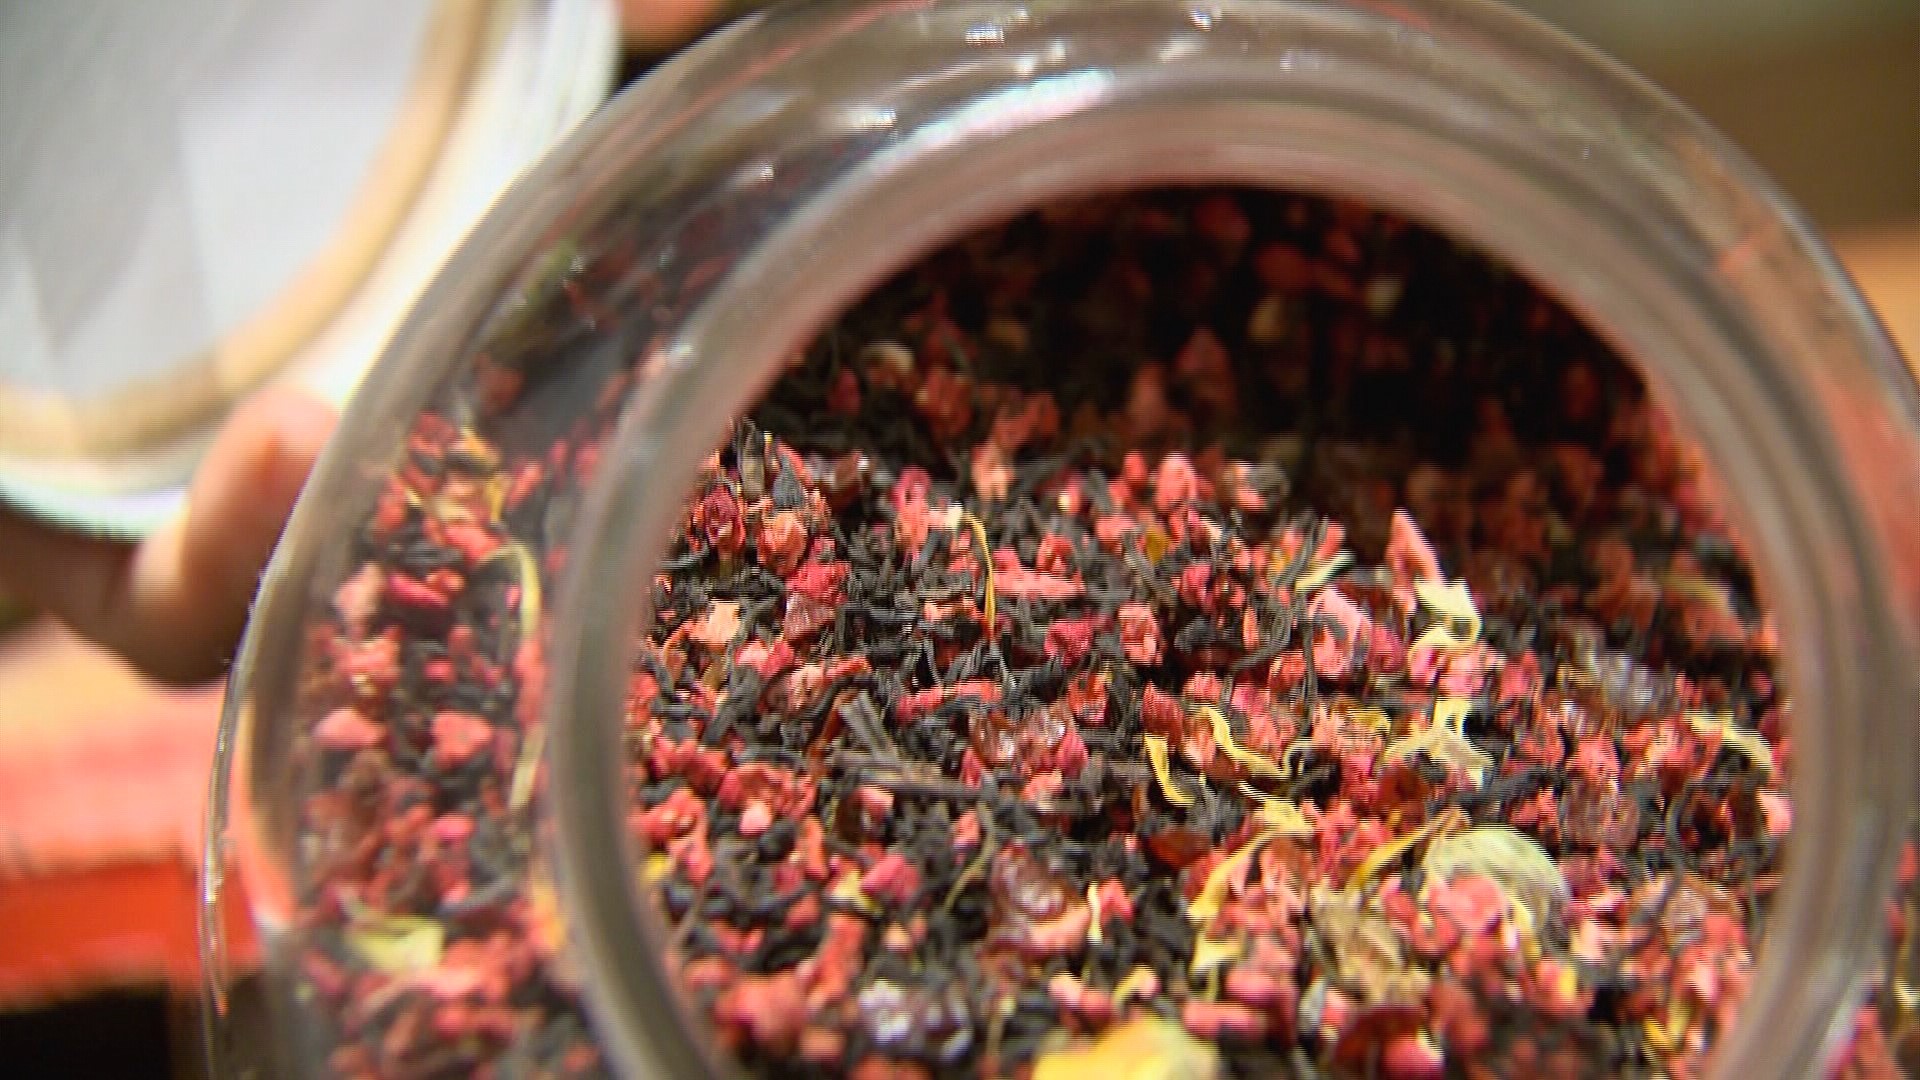 As one of the Market's oldest retail spots, MarketSpice has been serving up unique spices, teas and coffee since 1911